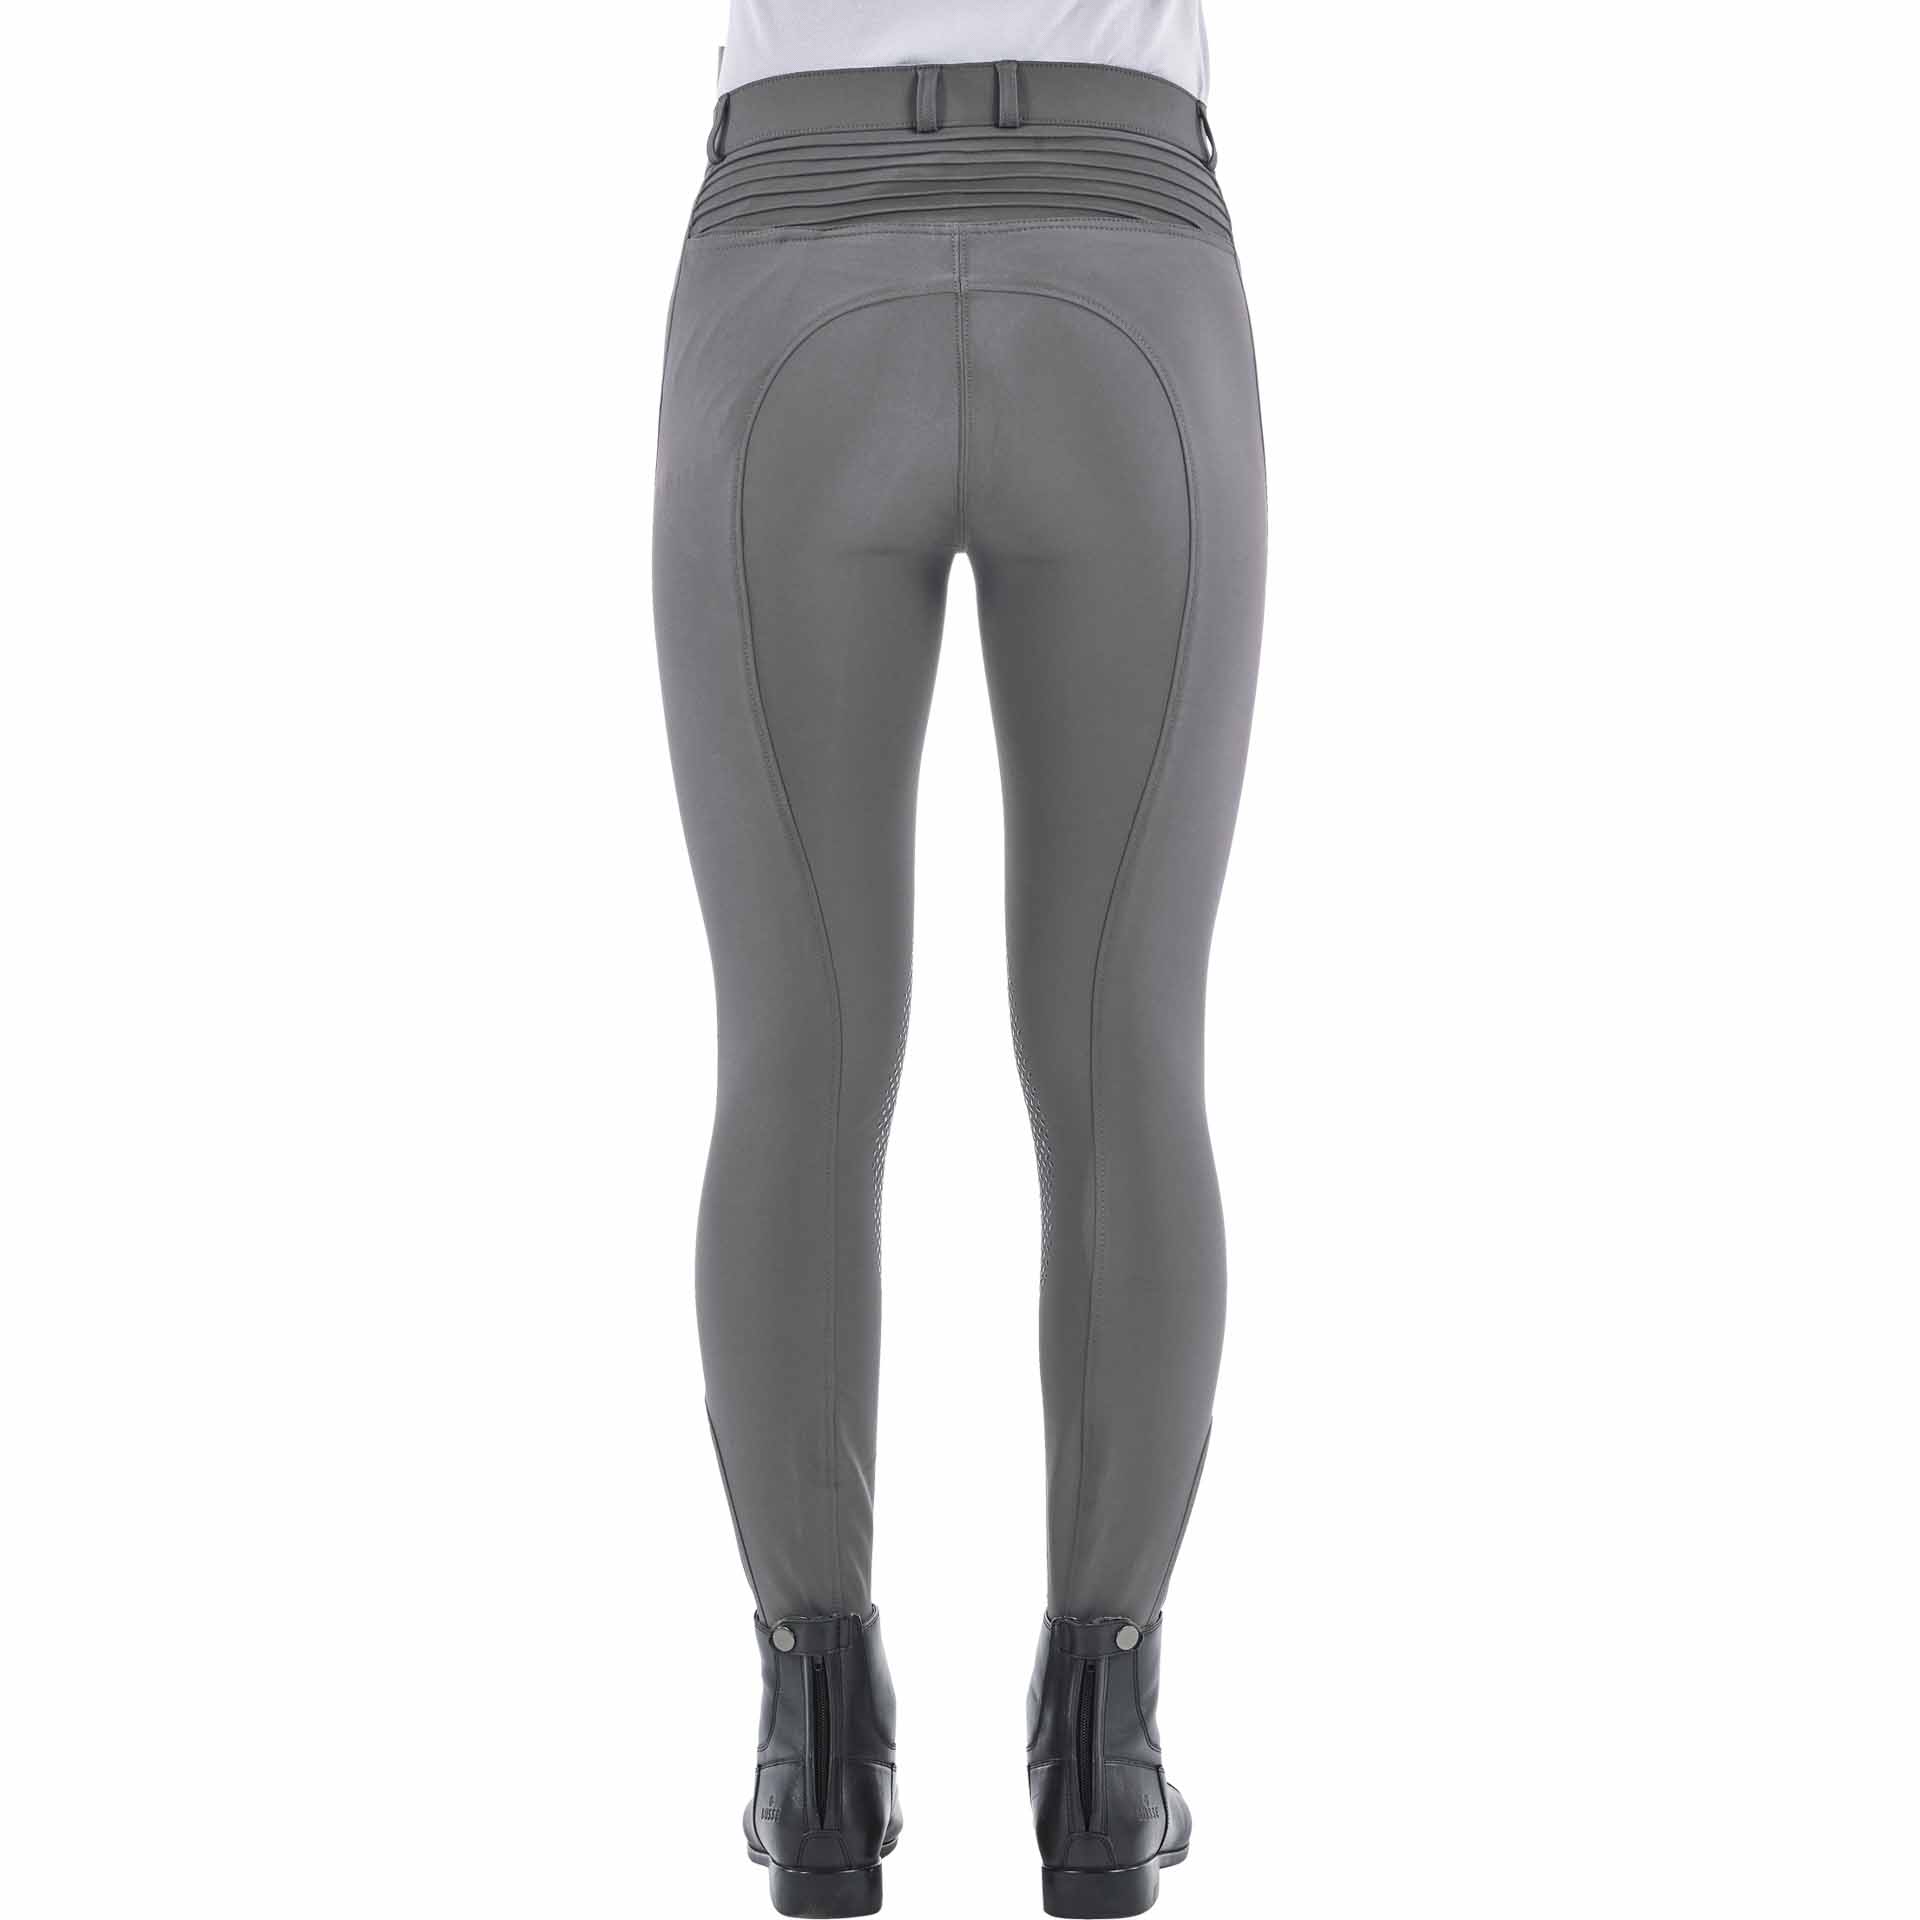 BUSSE Breeches MADEIRA-KNIE II 34 gray